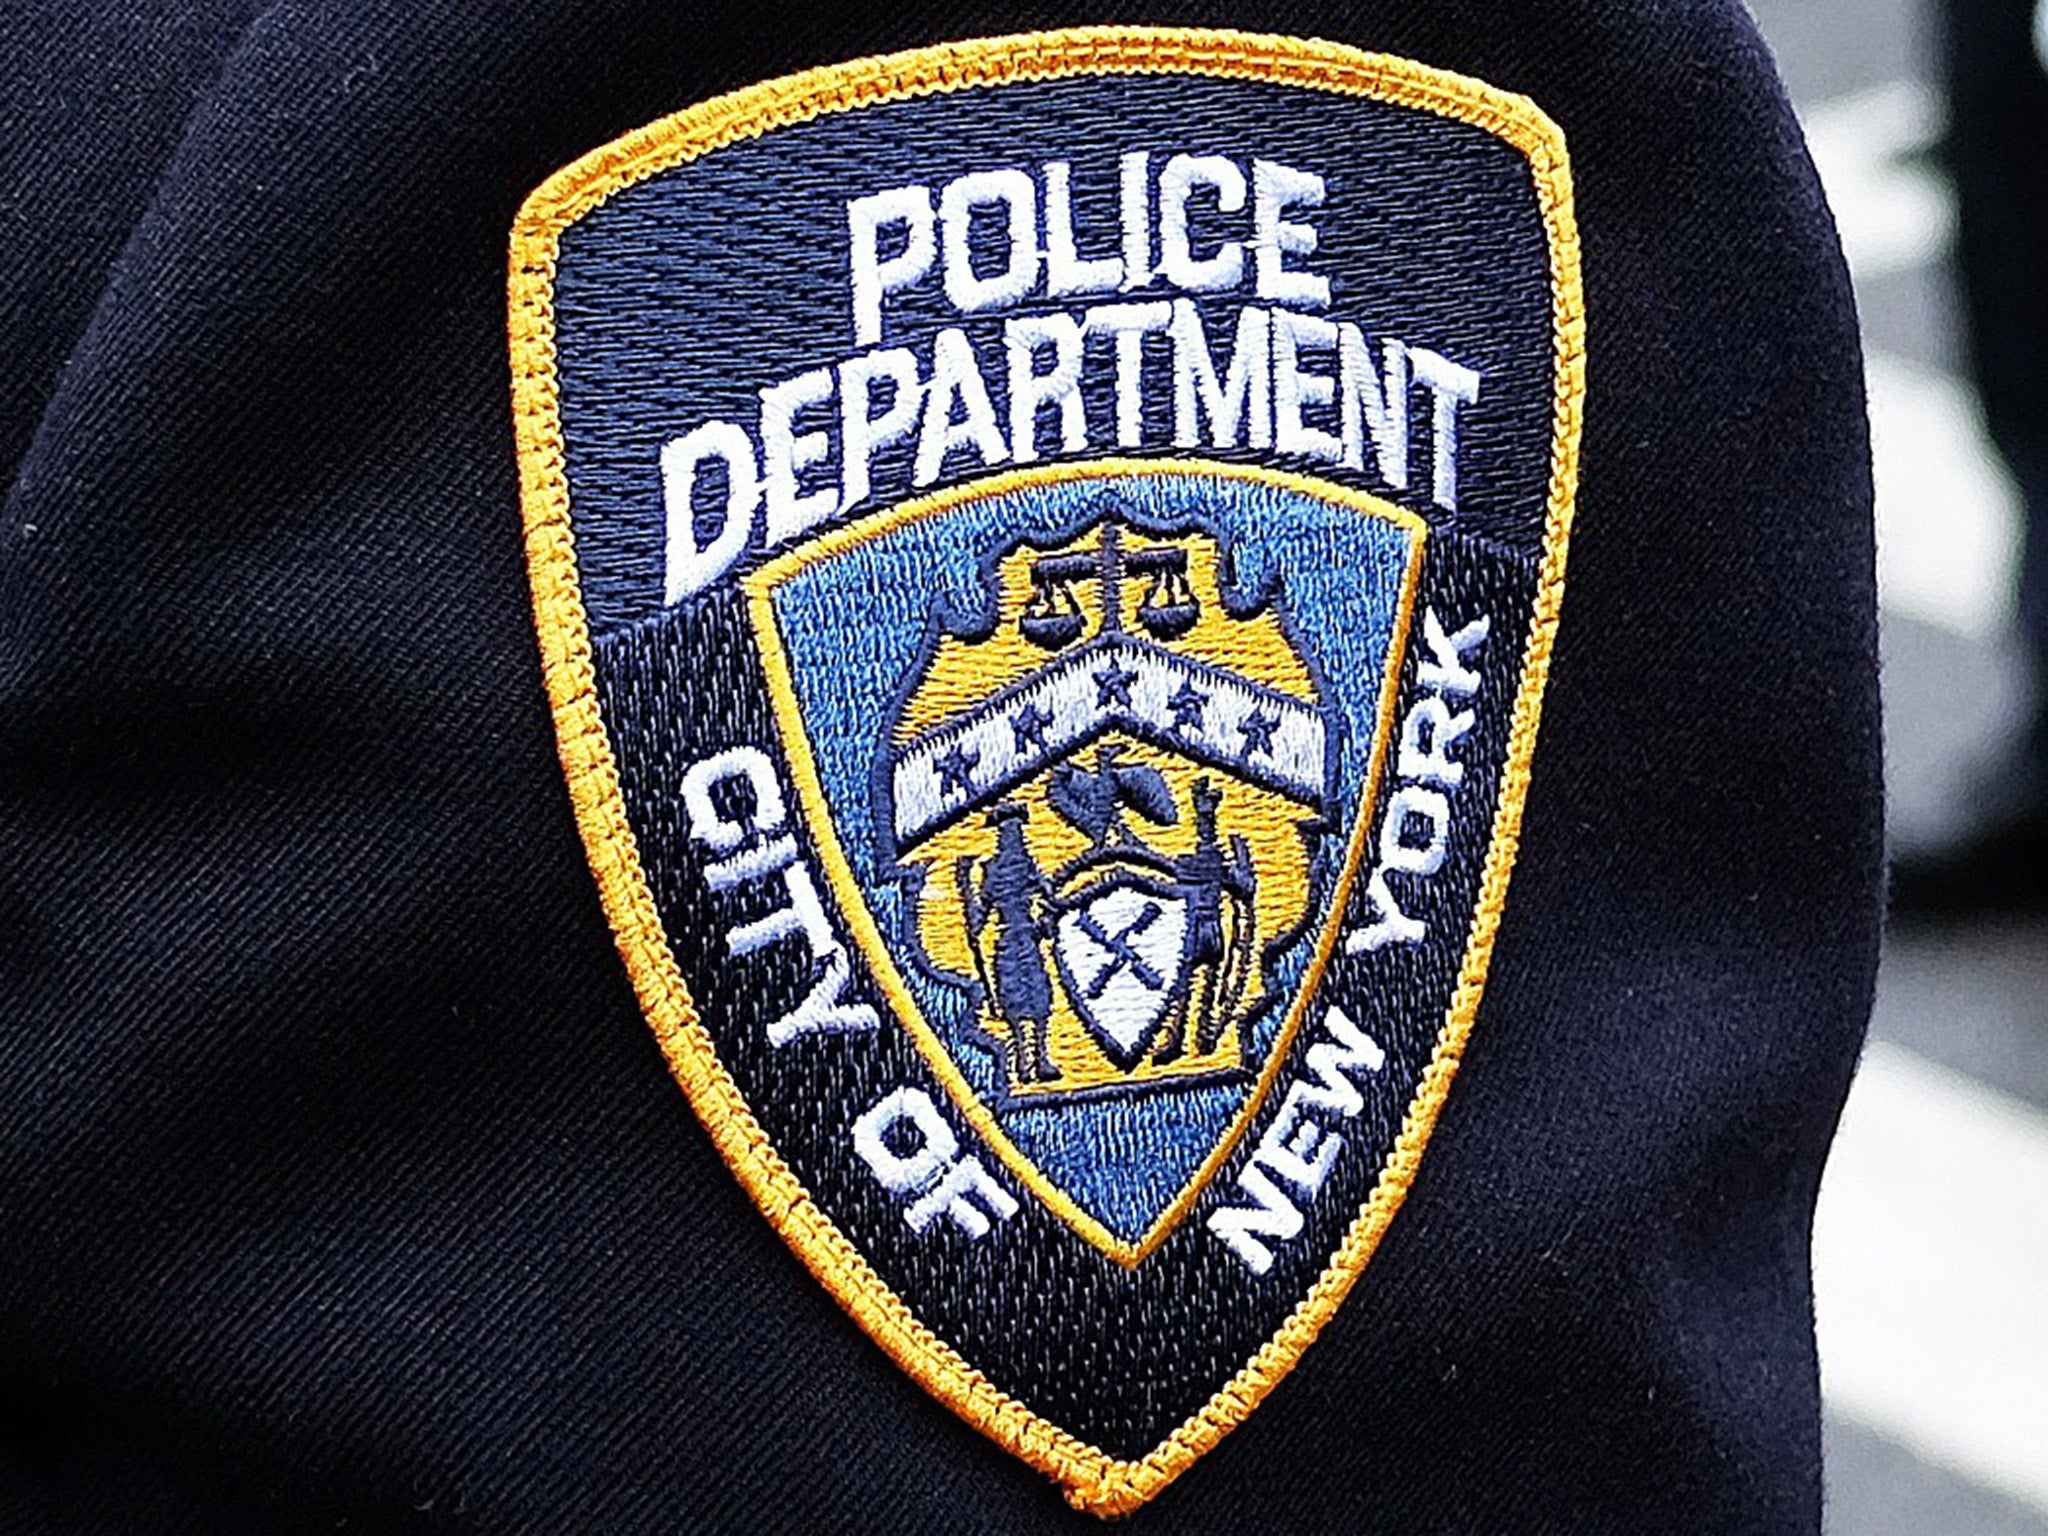 NYPD officer arrested and charged as an 'illegal agent' of China